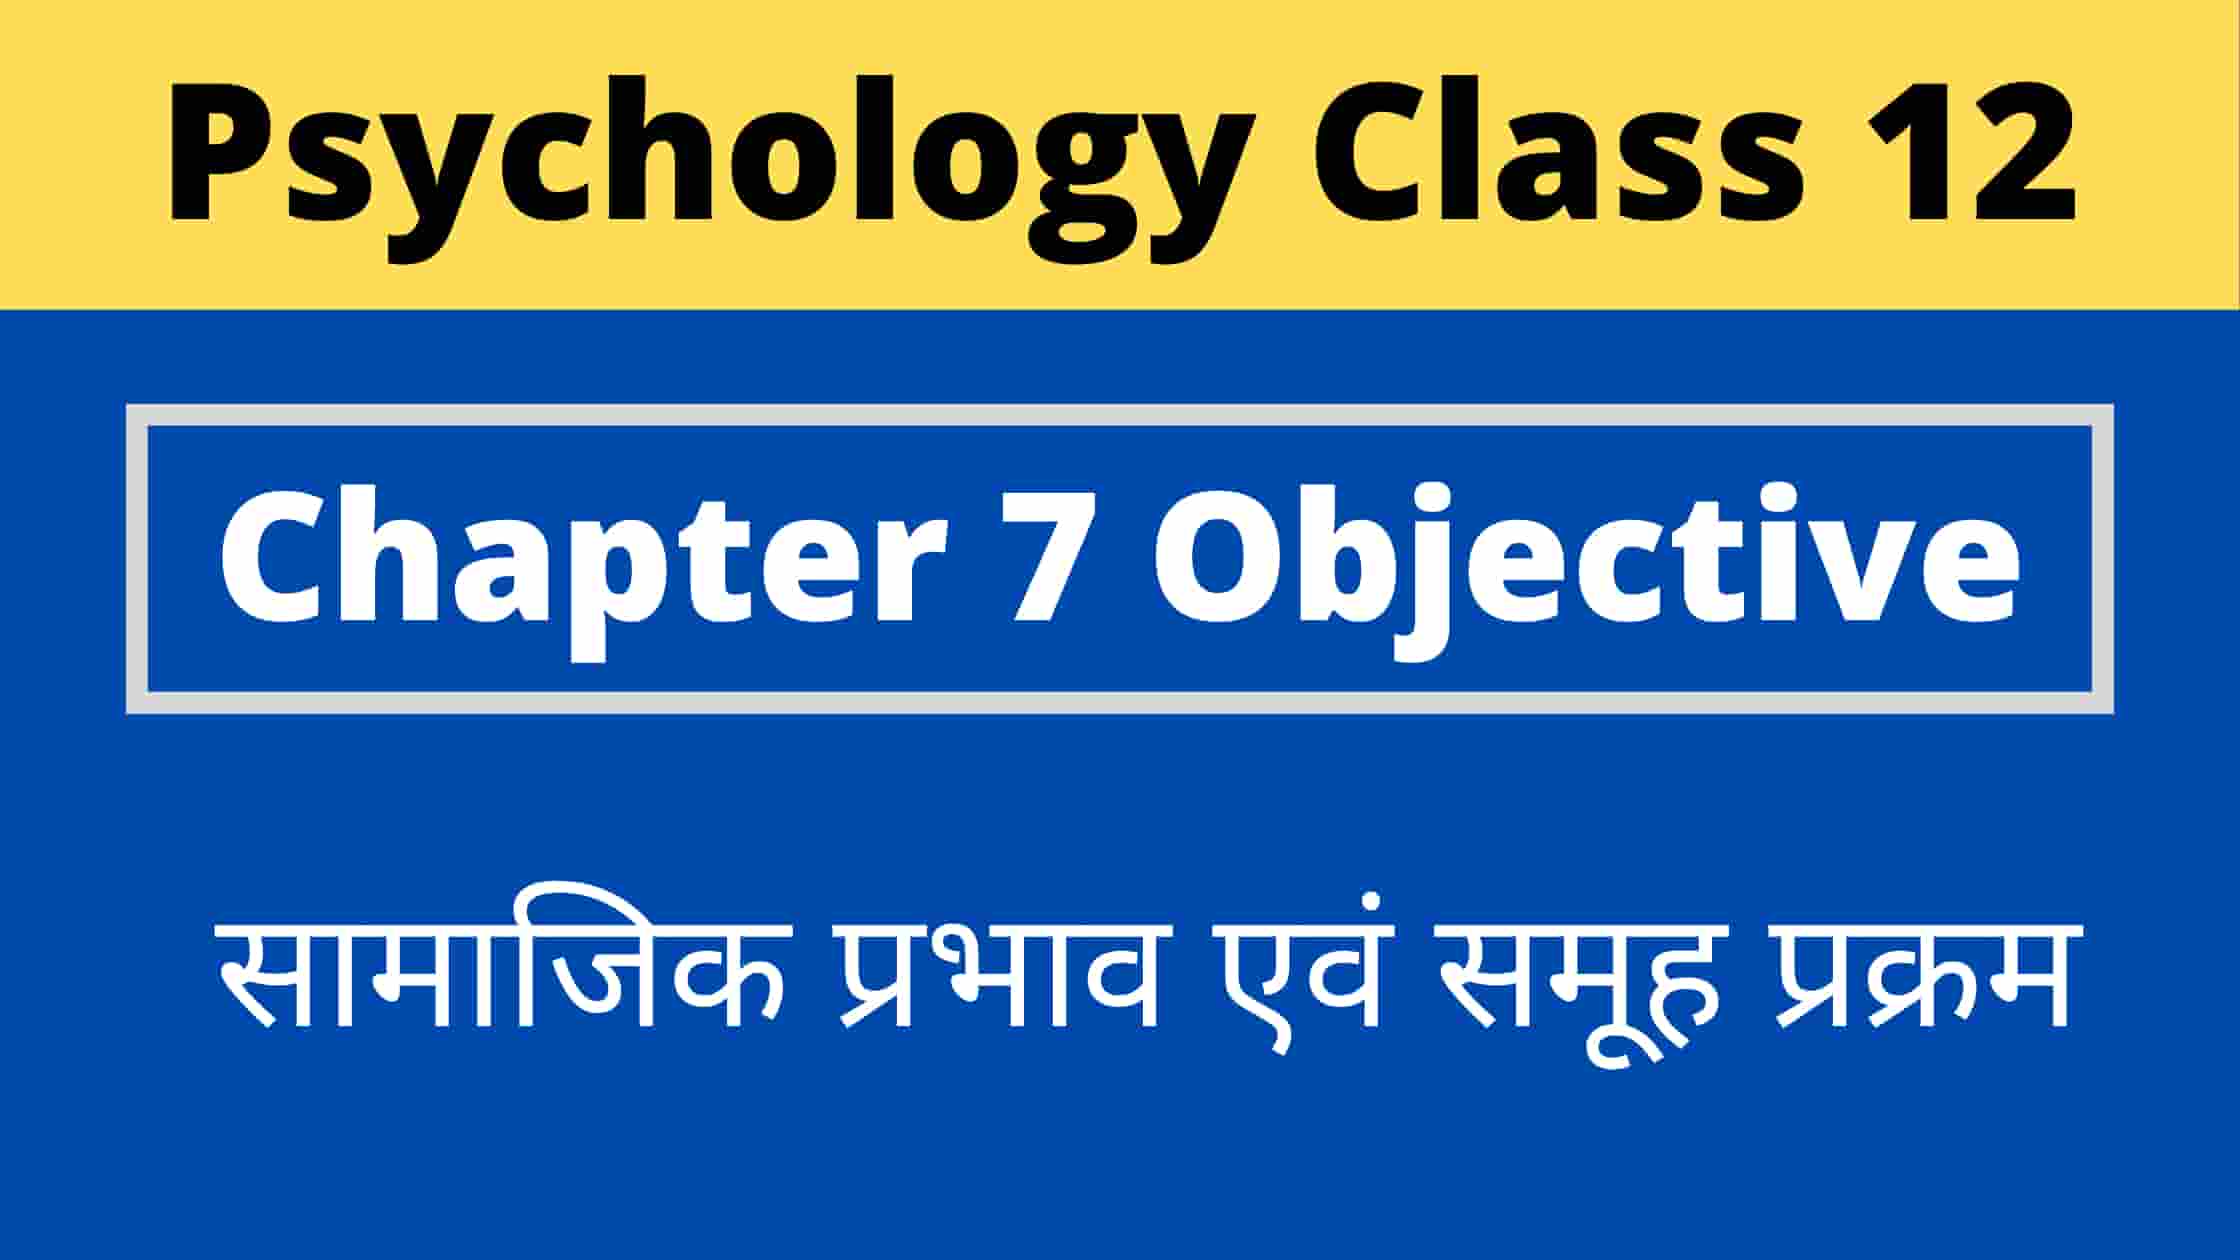 You are currently viewing Psychology Class 12 Chapter 7